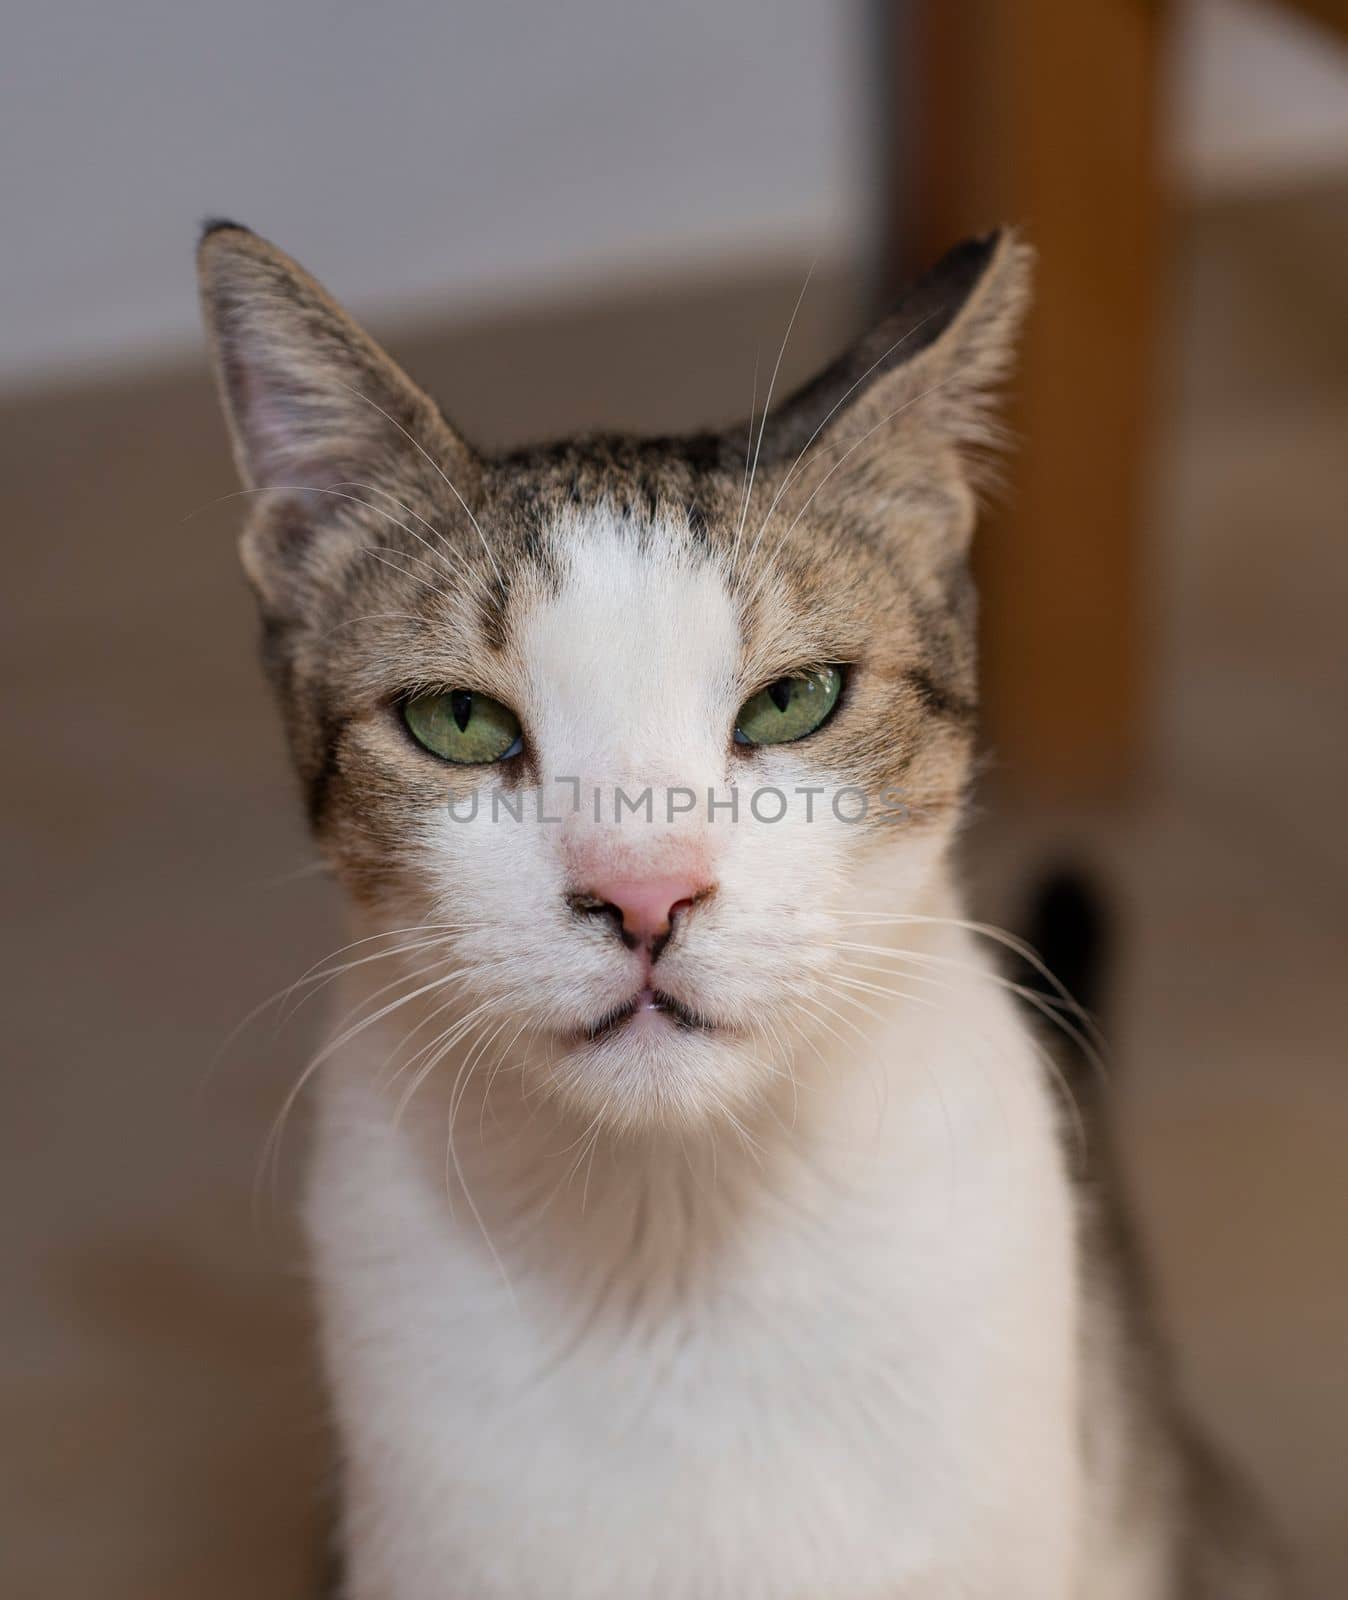 Closeup of cute domestic tabby house cat felis catus with humorous stern expression on face